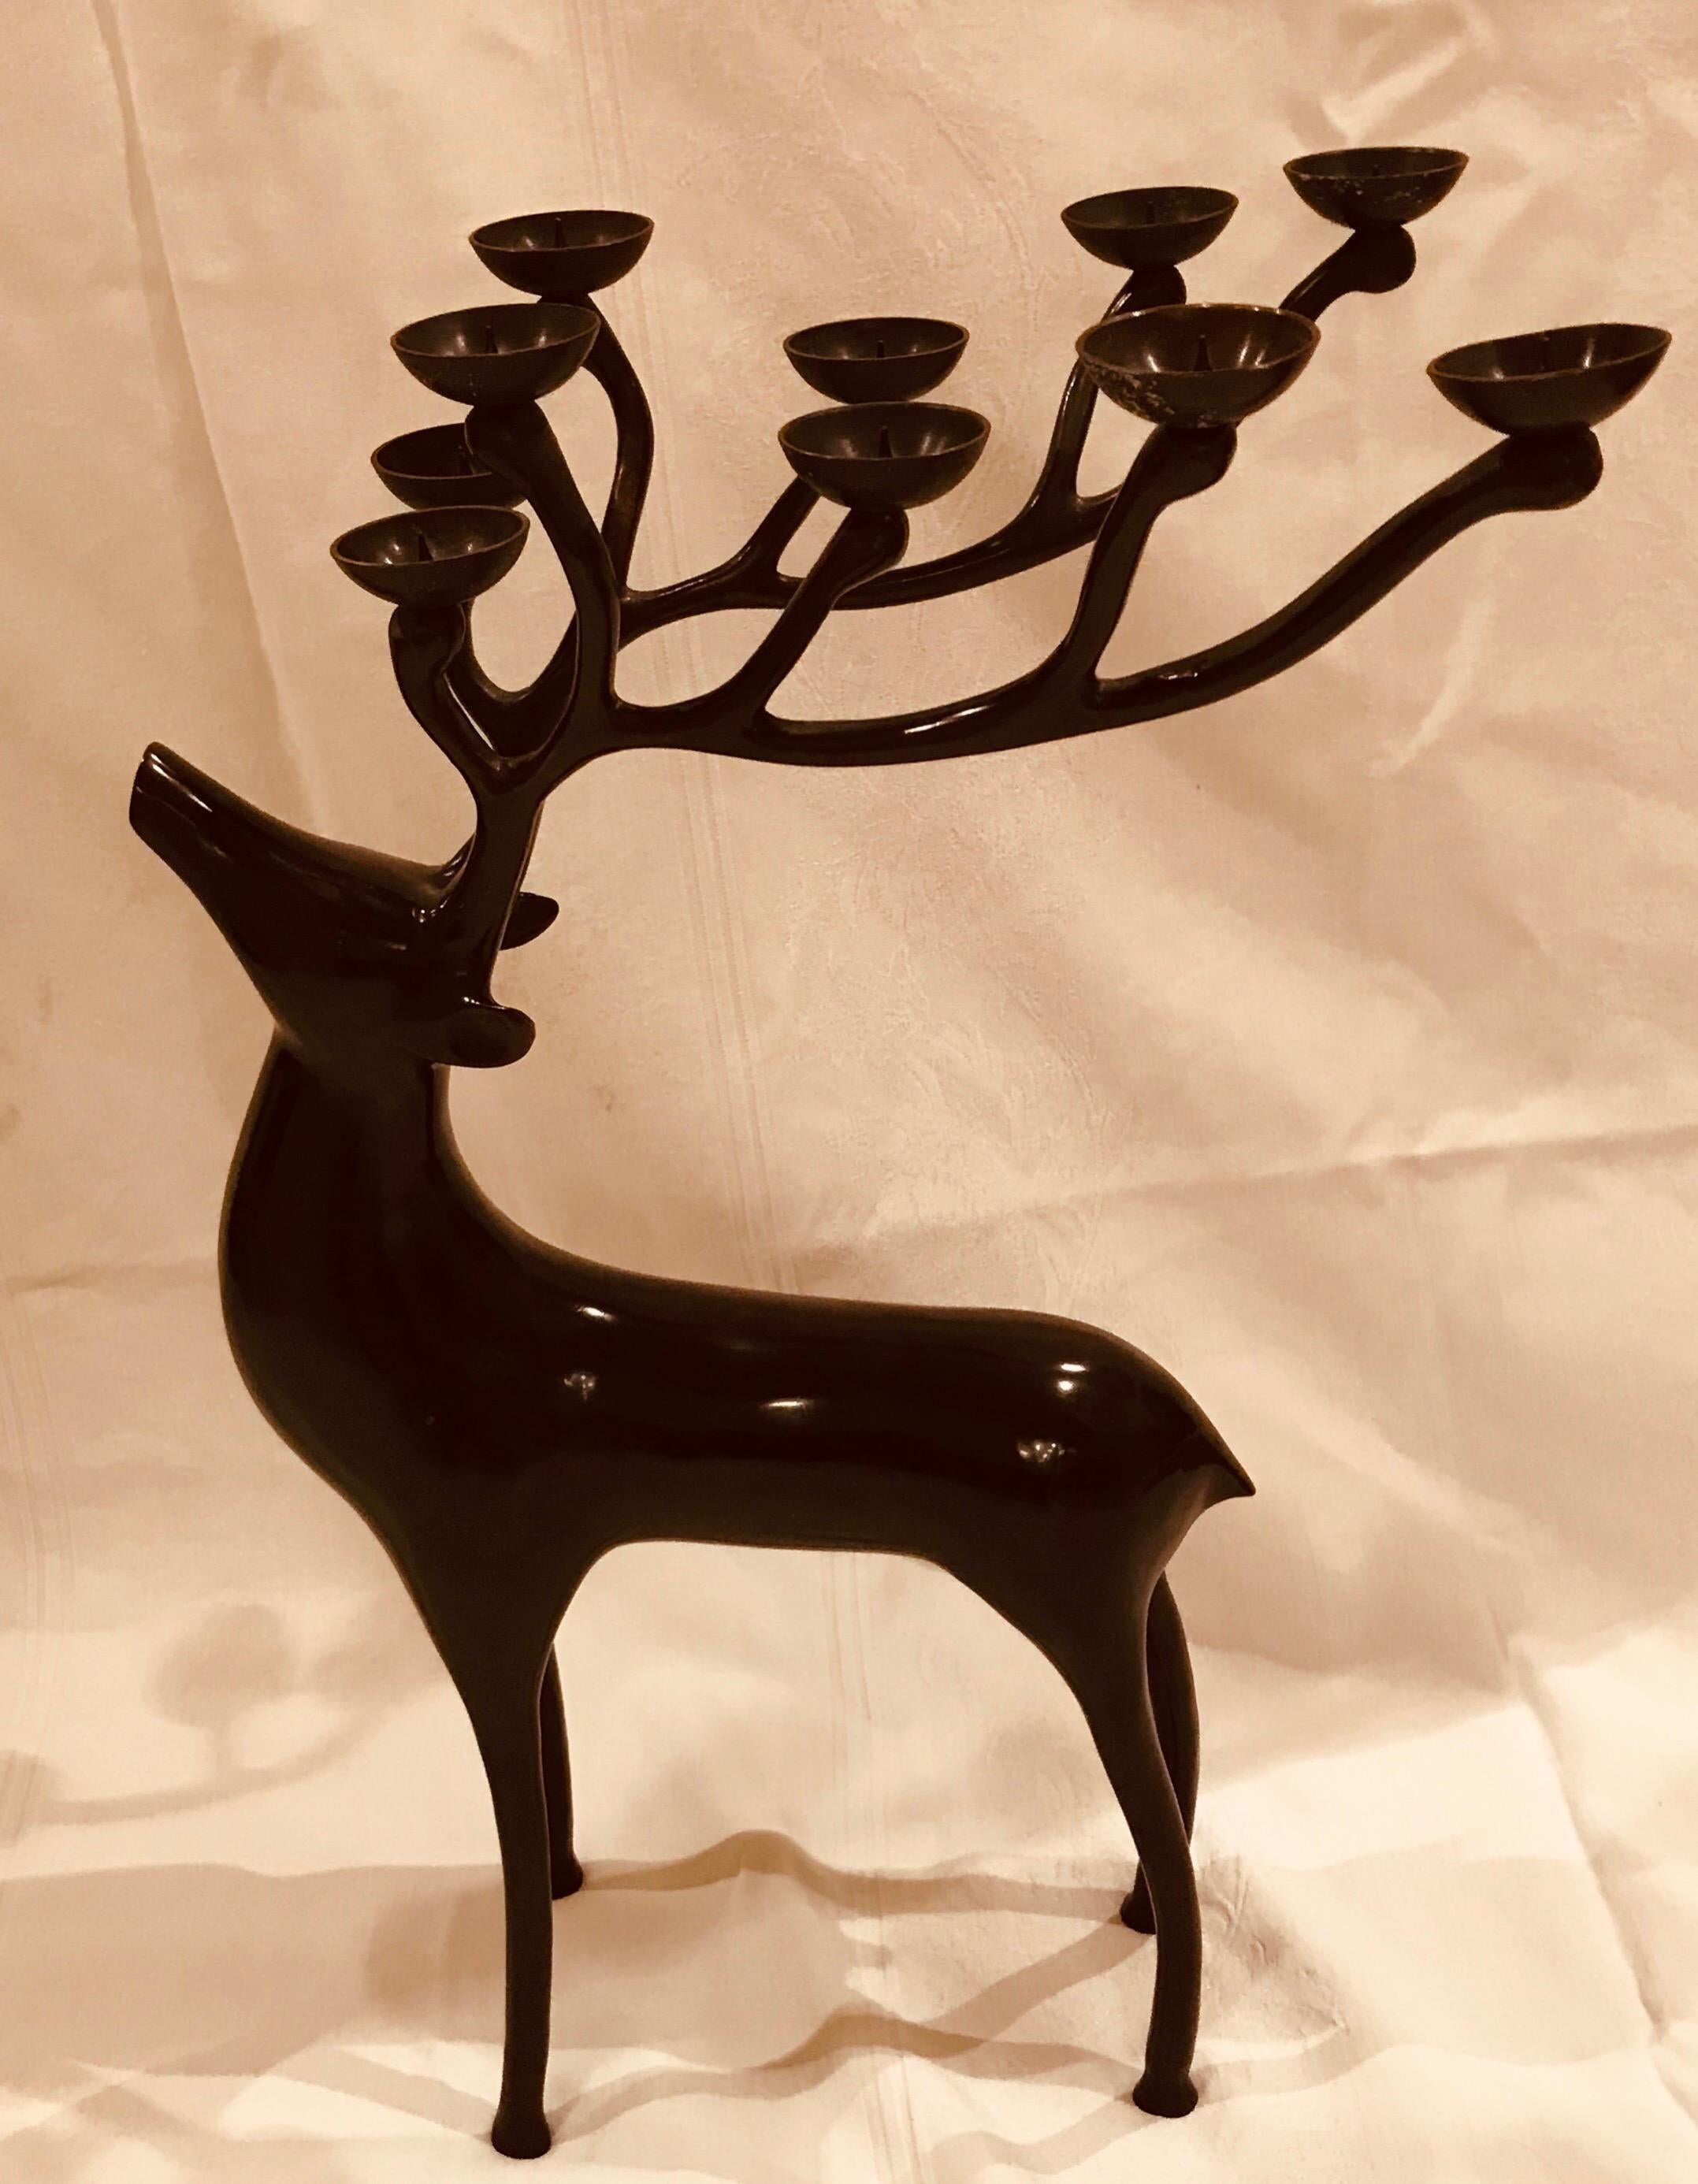 These dark oiled bronze Abstract Reindeer candelabras each hold 10 candles. 20” high, with an 11.5” antler spread, they are weighty and impressive on a hall entry table or placed beside a Christmas display.

Made in the mid-1990s, these large